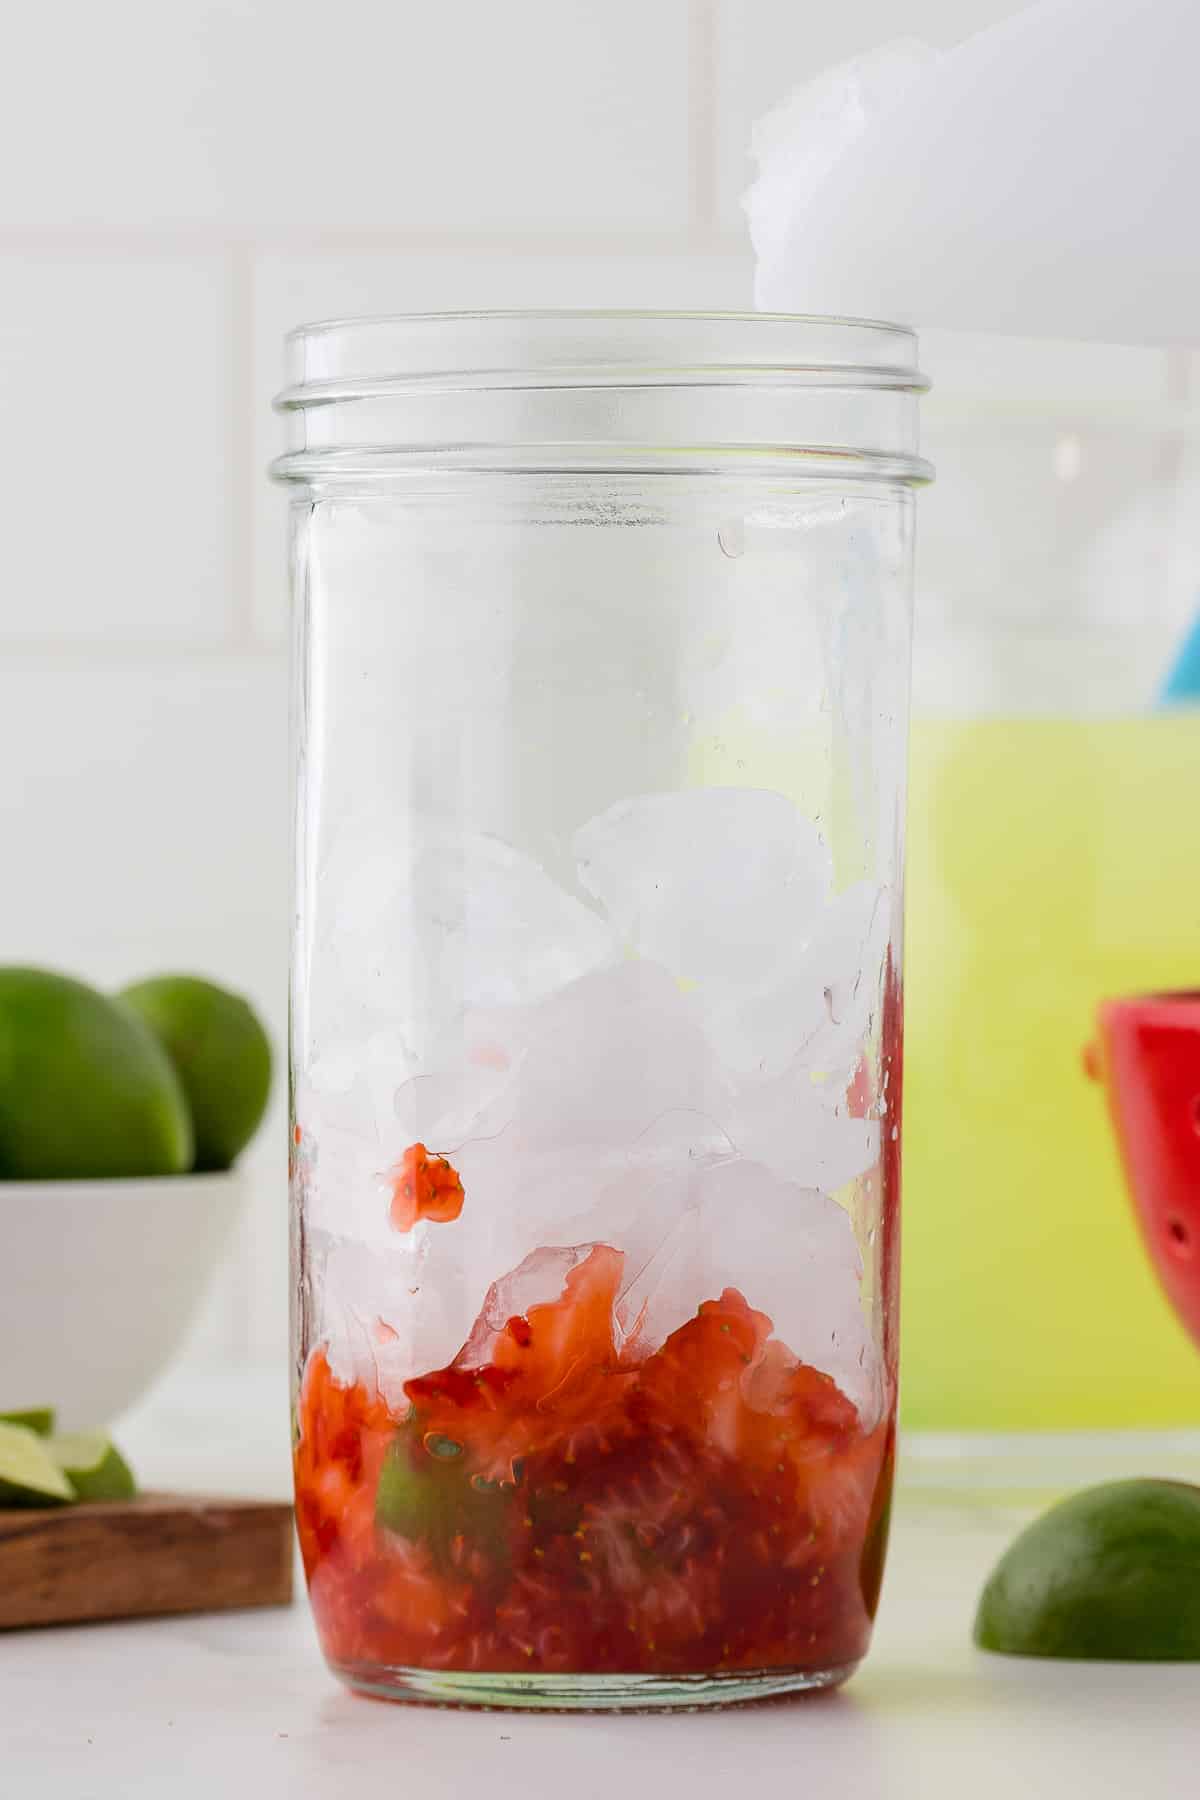 Strawberry puree and ice in a clear glass drinking cup